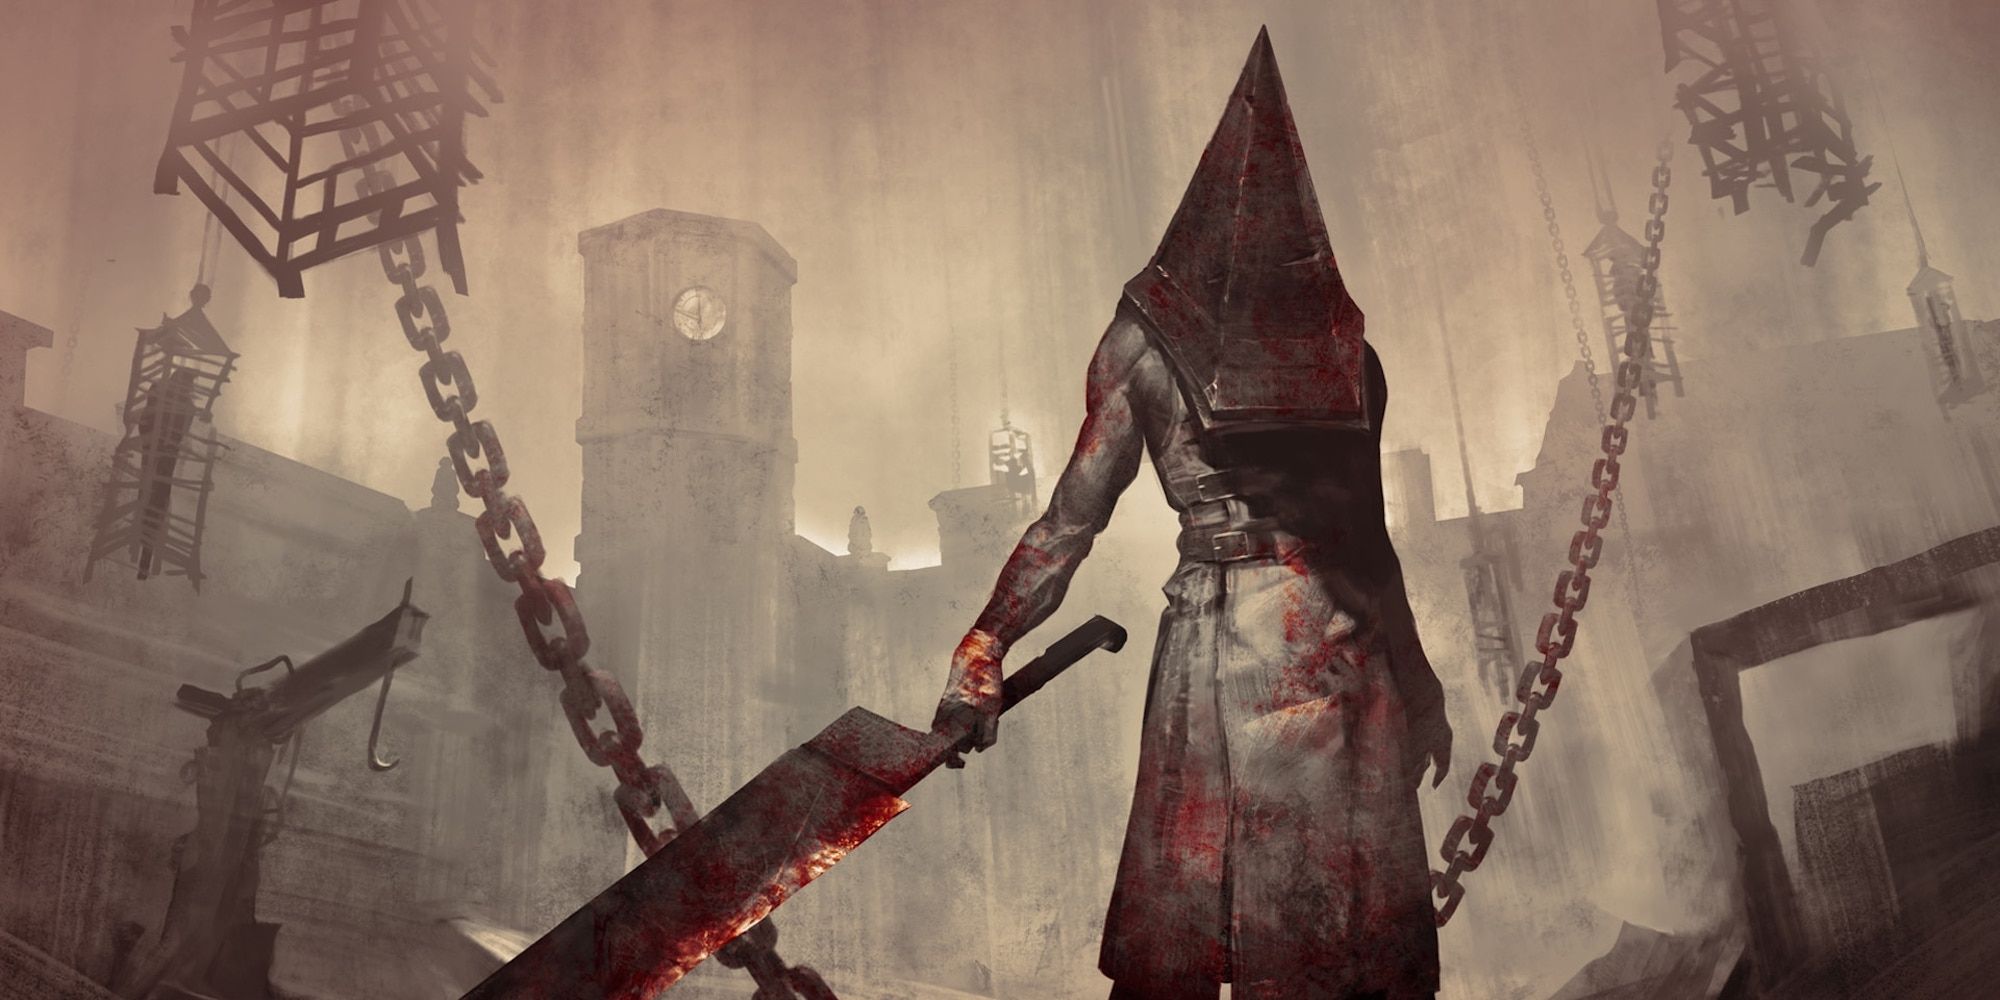 Pyramid Hill holding a sharp weapon in Silent Hill